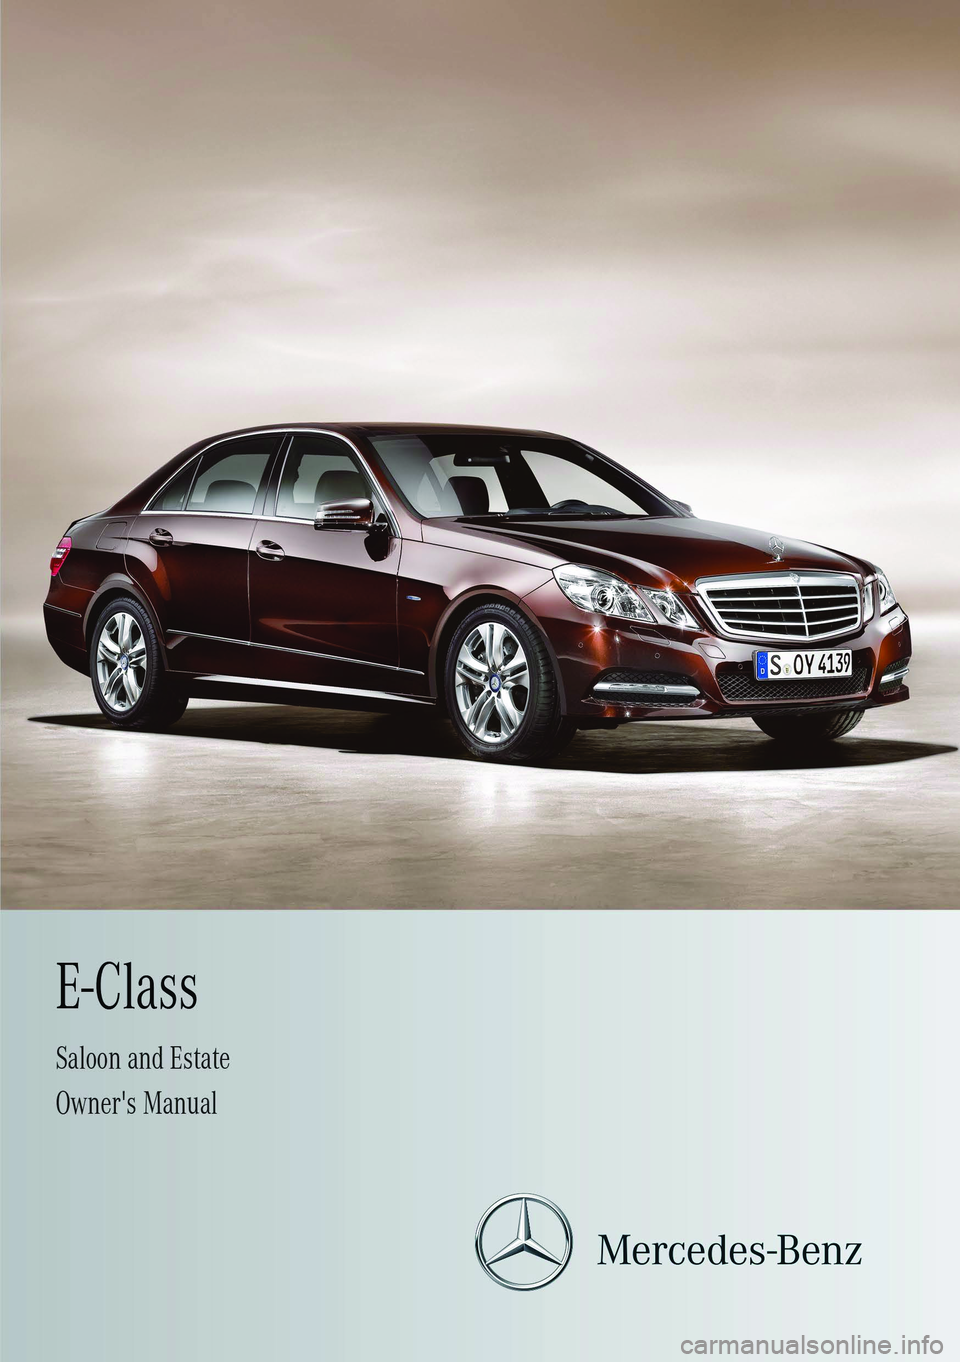 MERCEDES-BENZ E-CLASS SALOON 2011  Owners Manual 